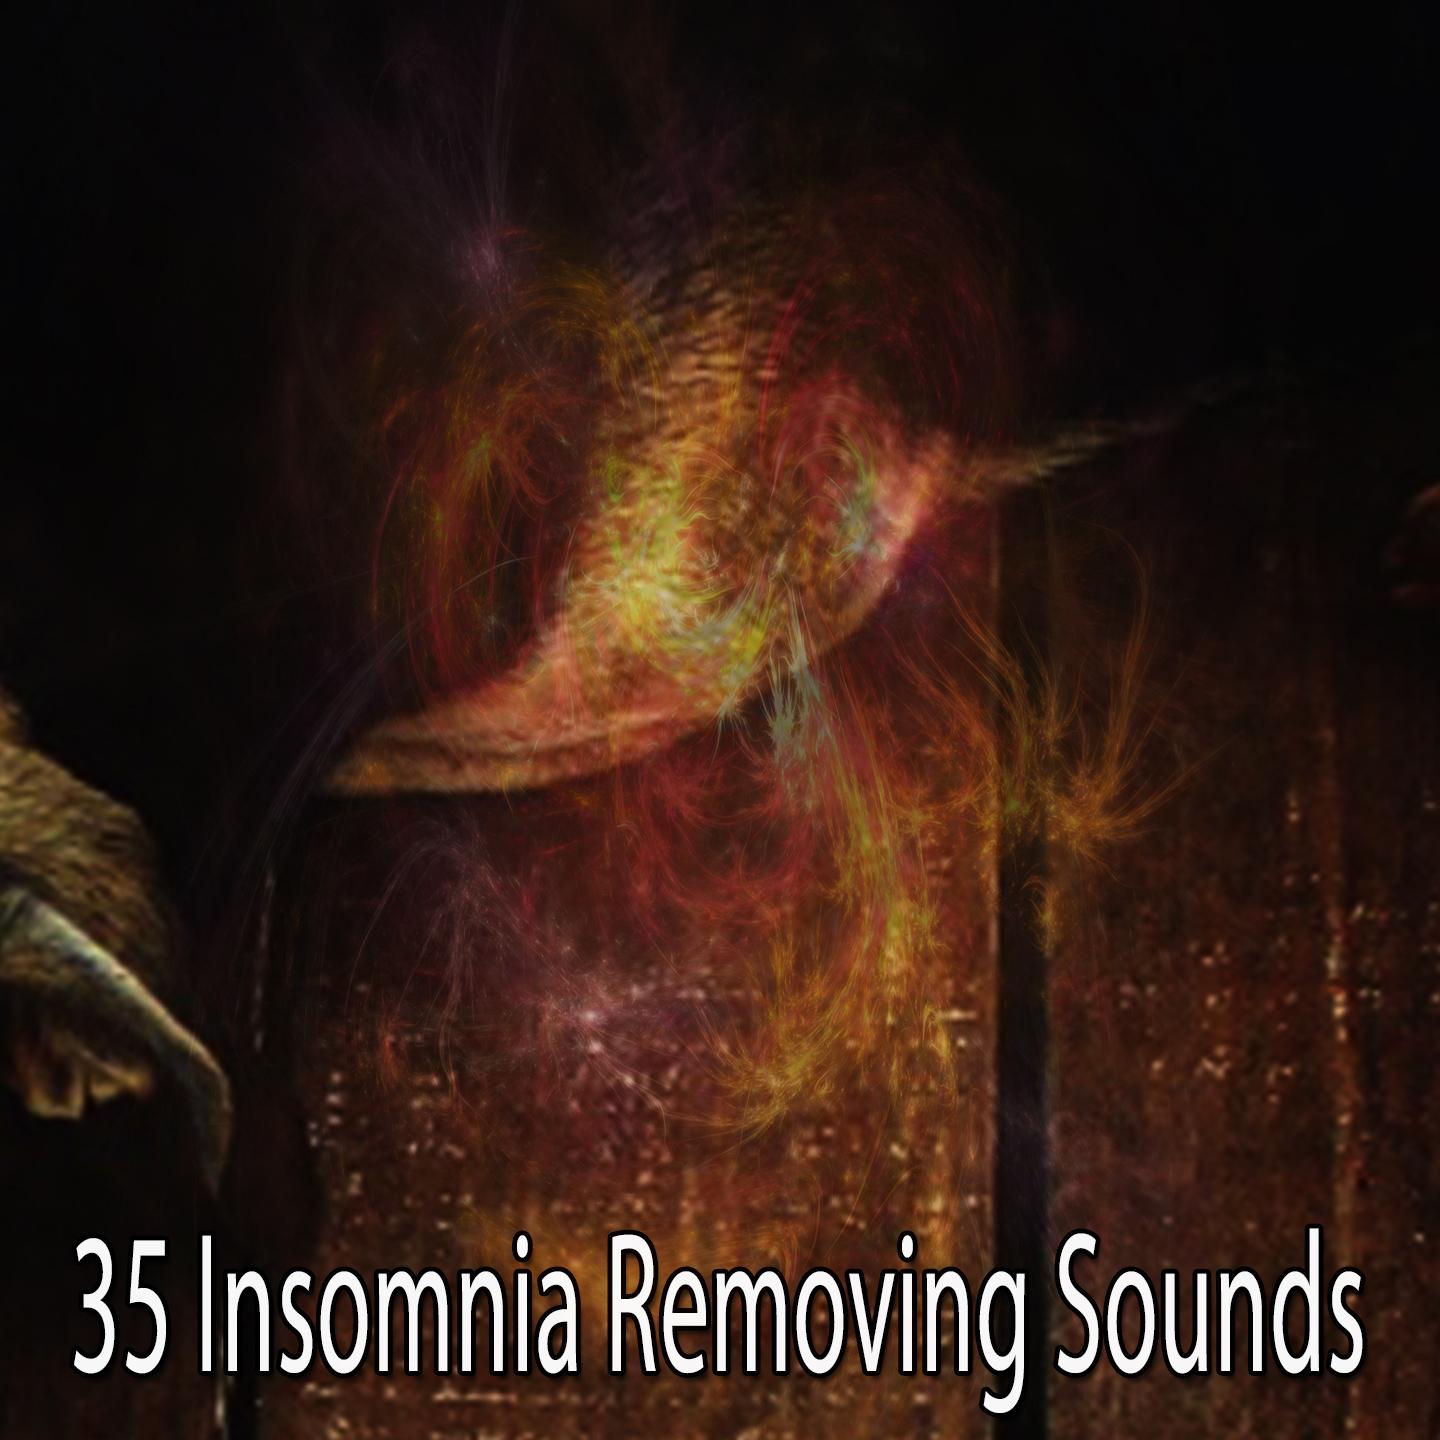 35 Insomnia Removing Sounds